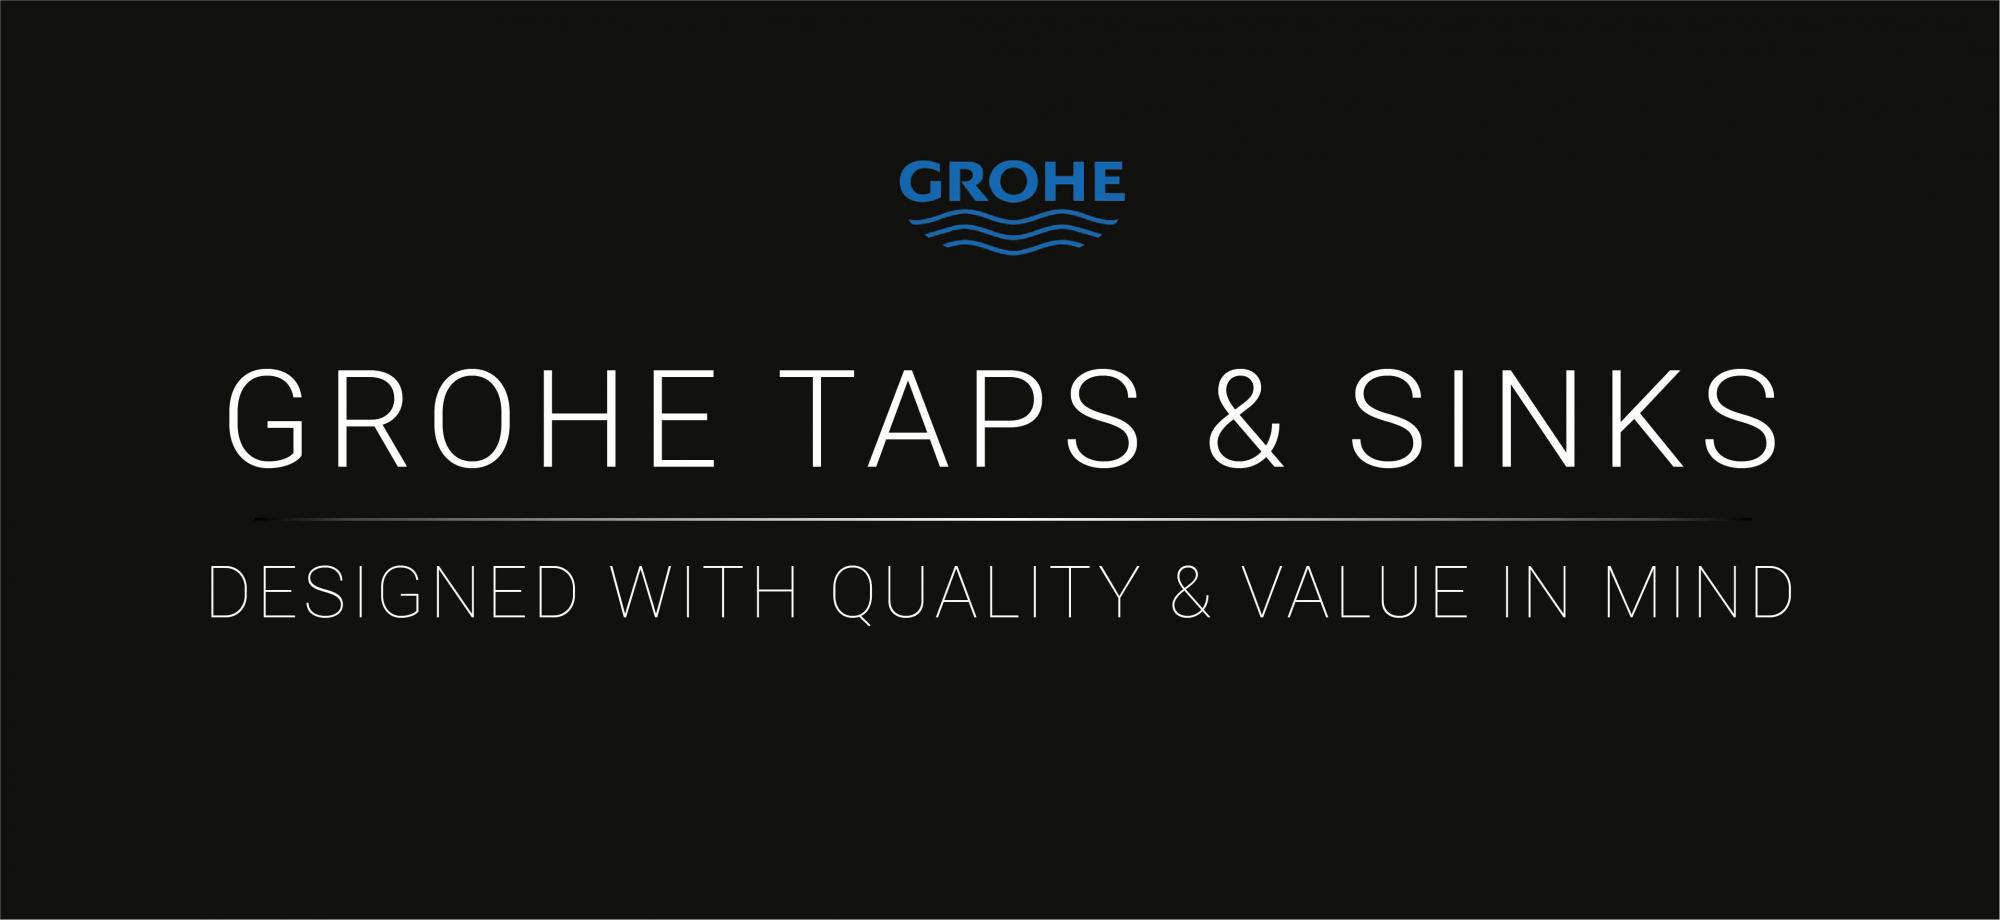 Grohe Logo - Grohe Kitchen Taps. Grohe Kitchen Sinks